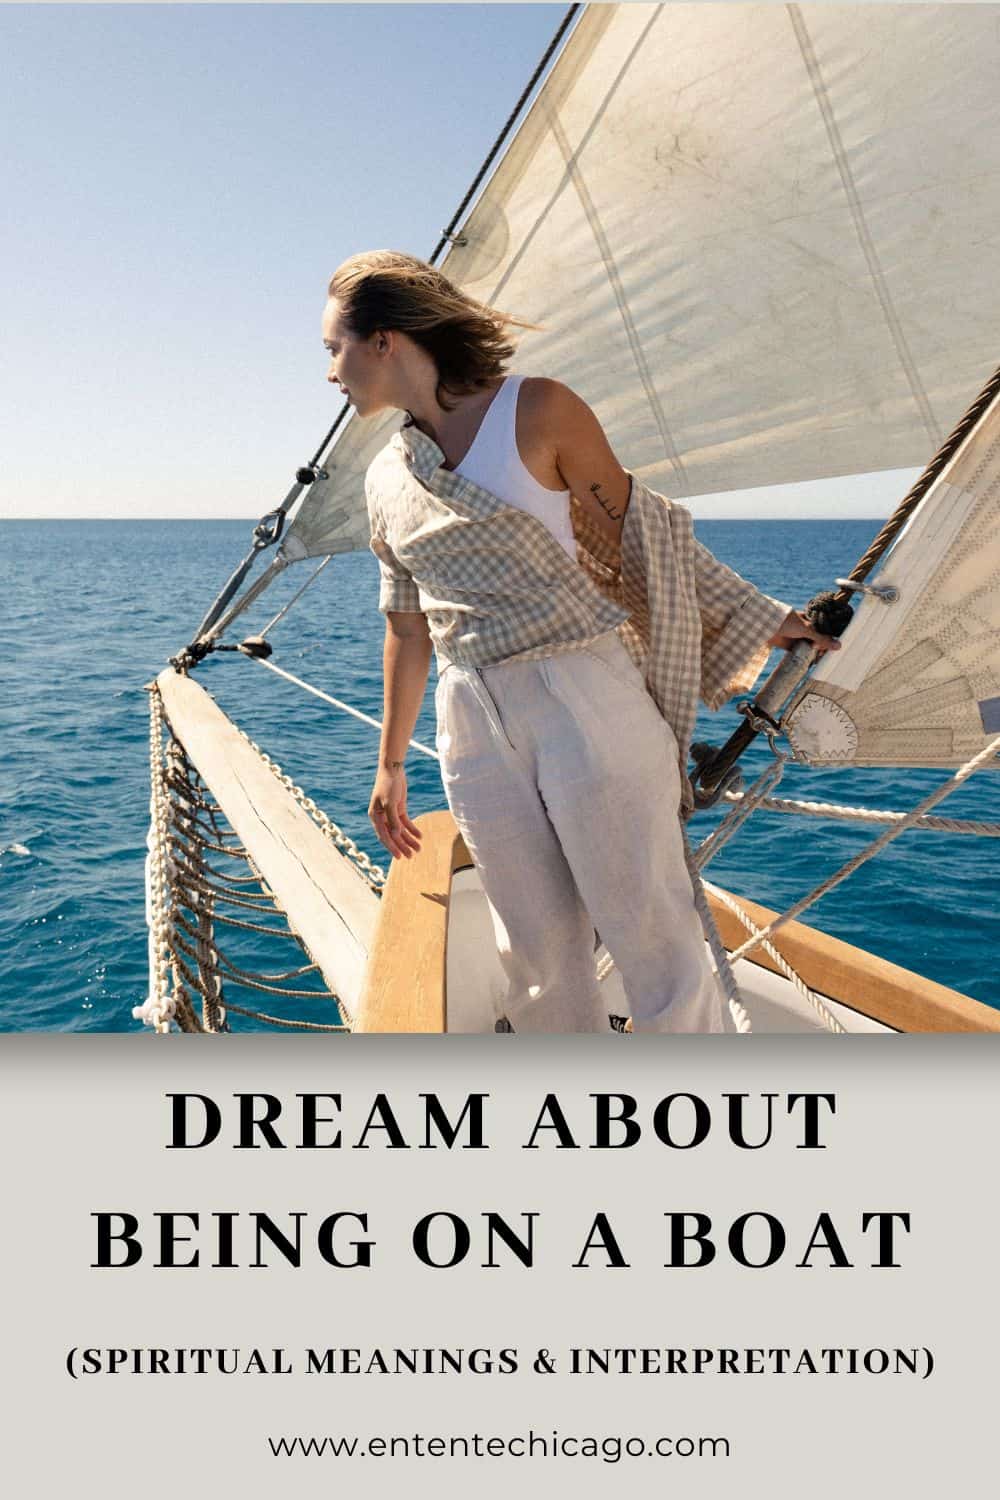 Dream About Being On A Boat (Spiritual Meanings & Interpretation)